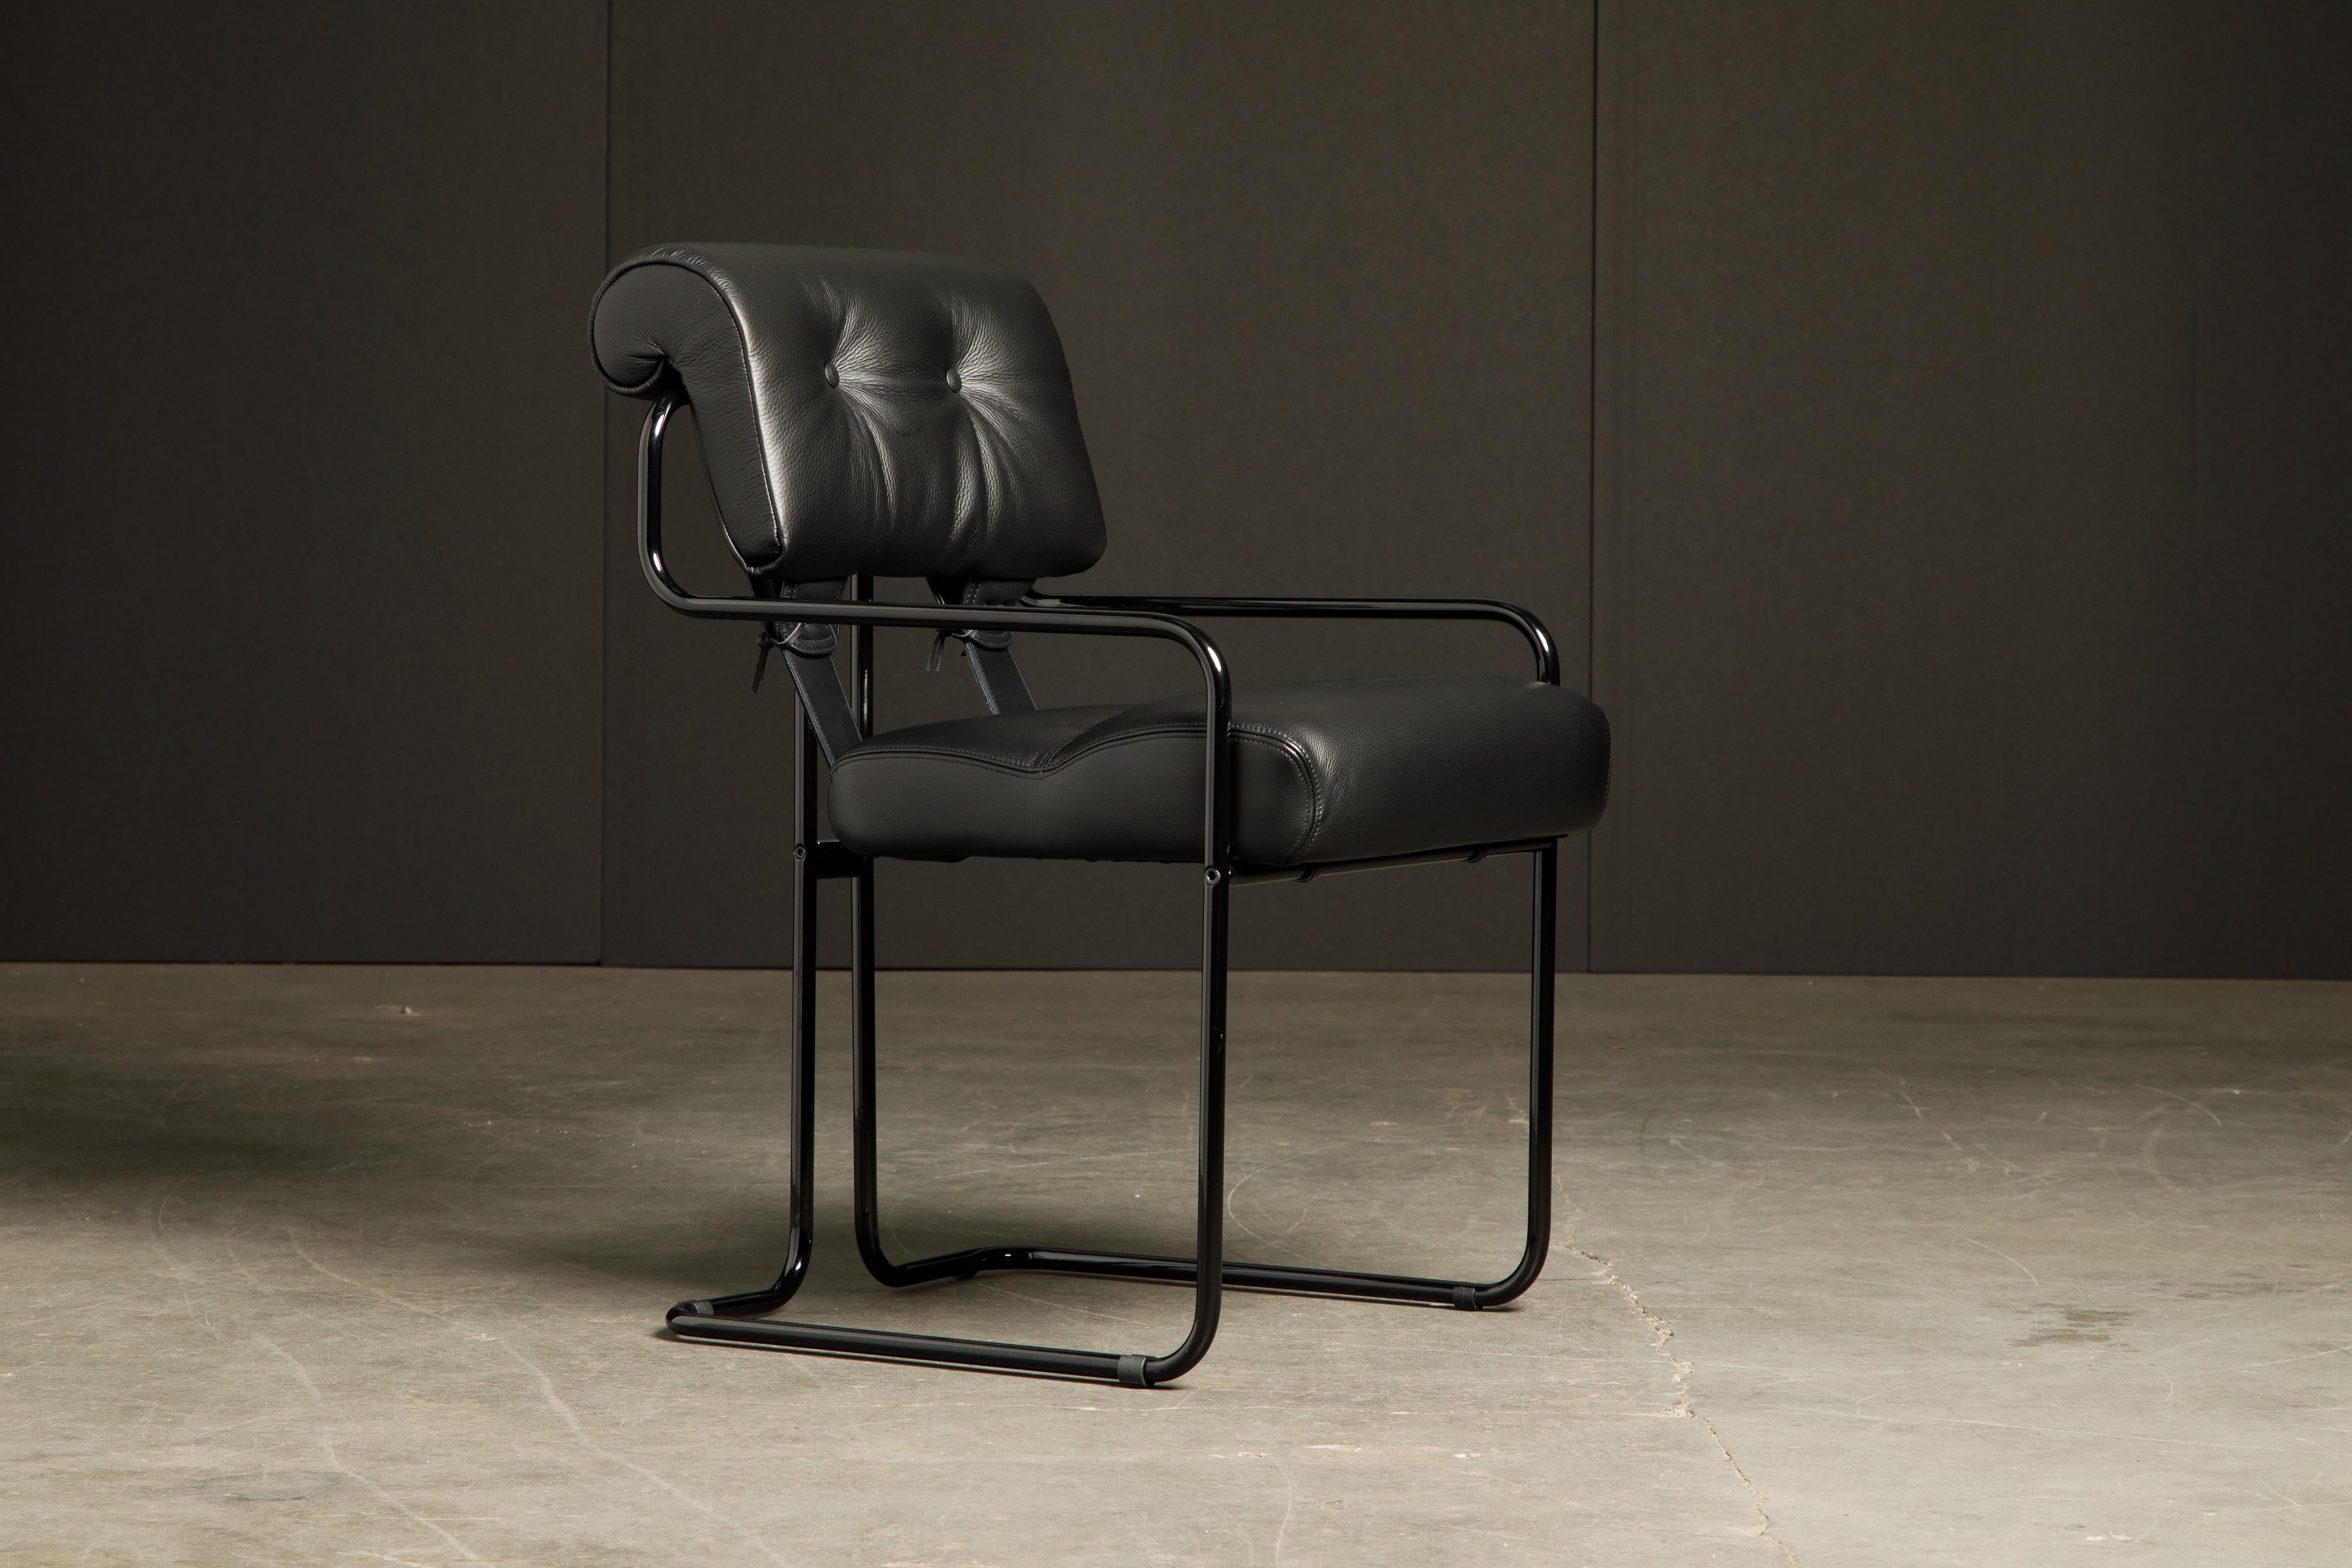 The most coveted dining chairs by interior designers are 'Tucroma' chairs by Guido Faleschini for i4 Mariani, and we have this incredible set of six (6) Tucroma armchairs in beautiful black leather with lacquered black frames. The seats and backs